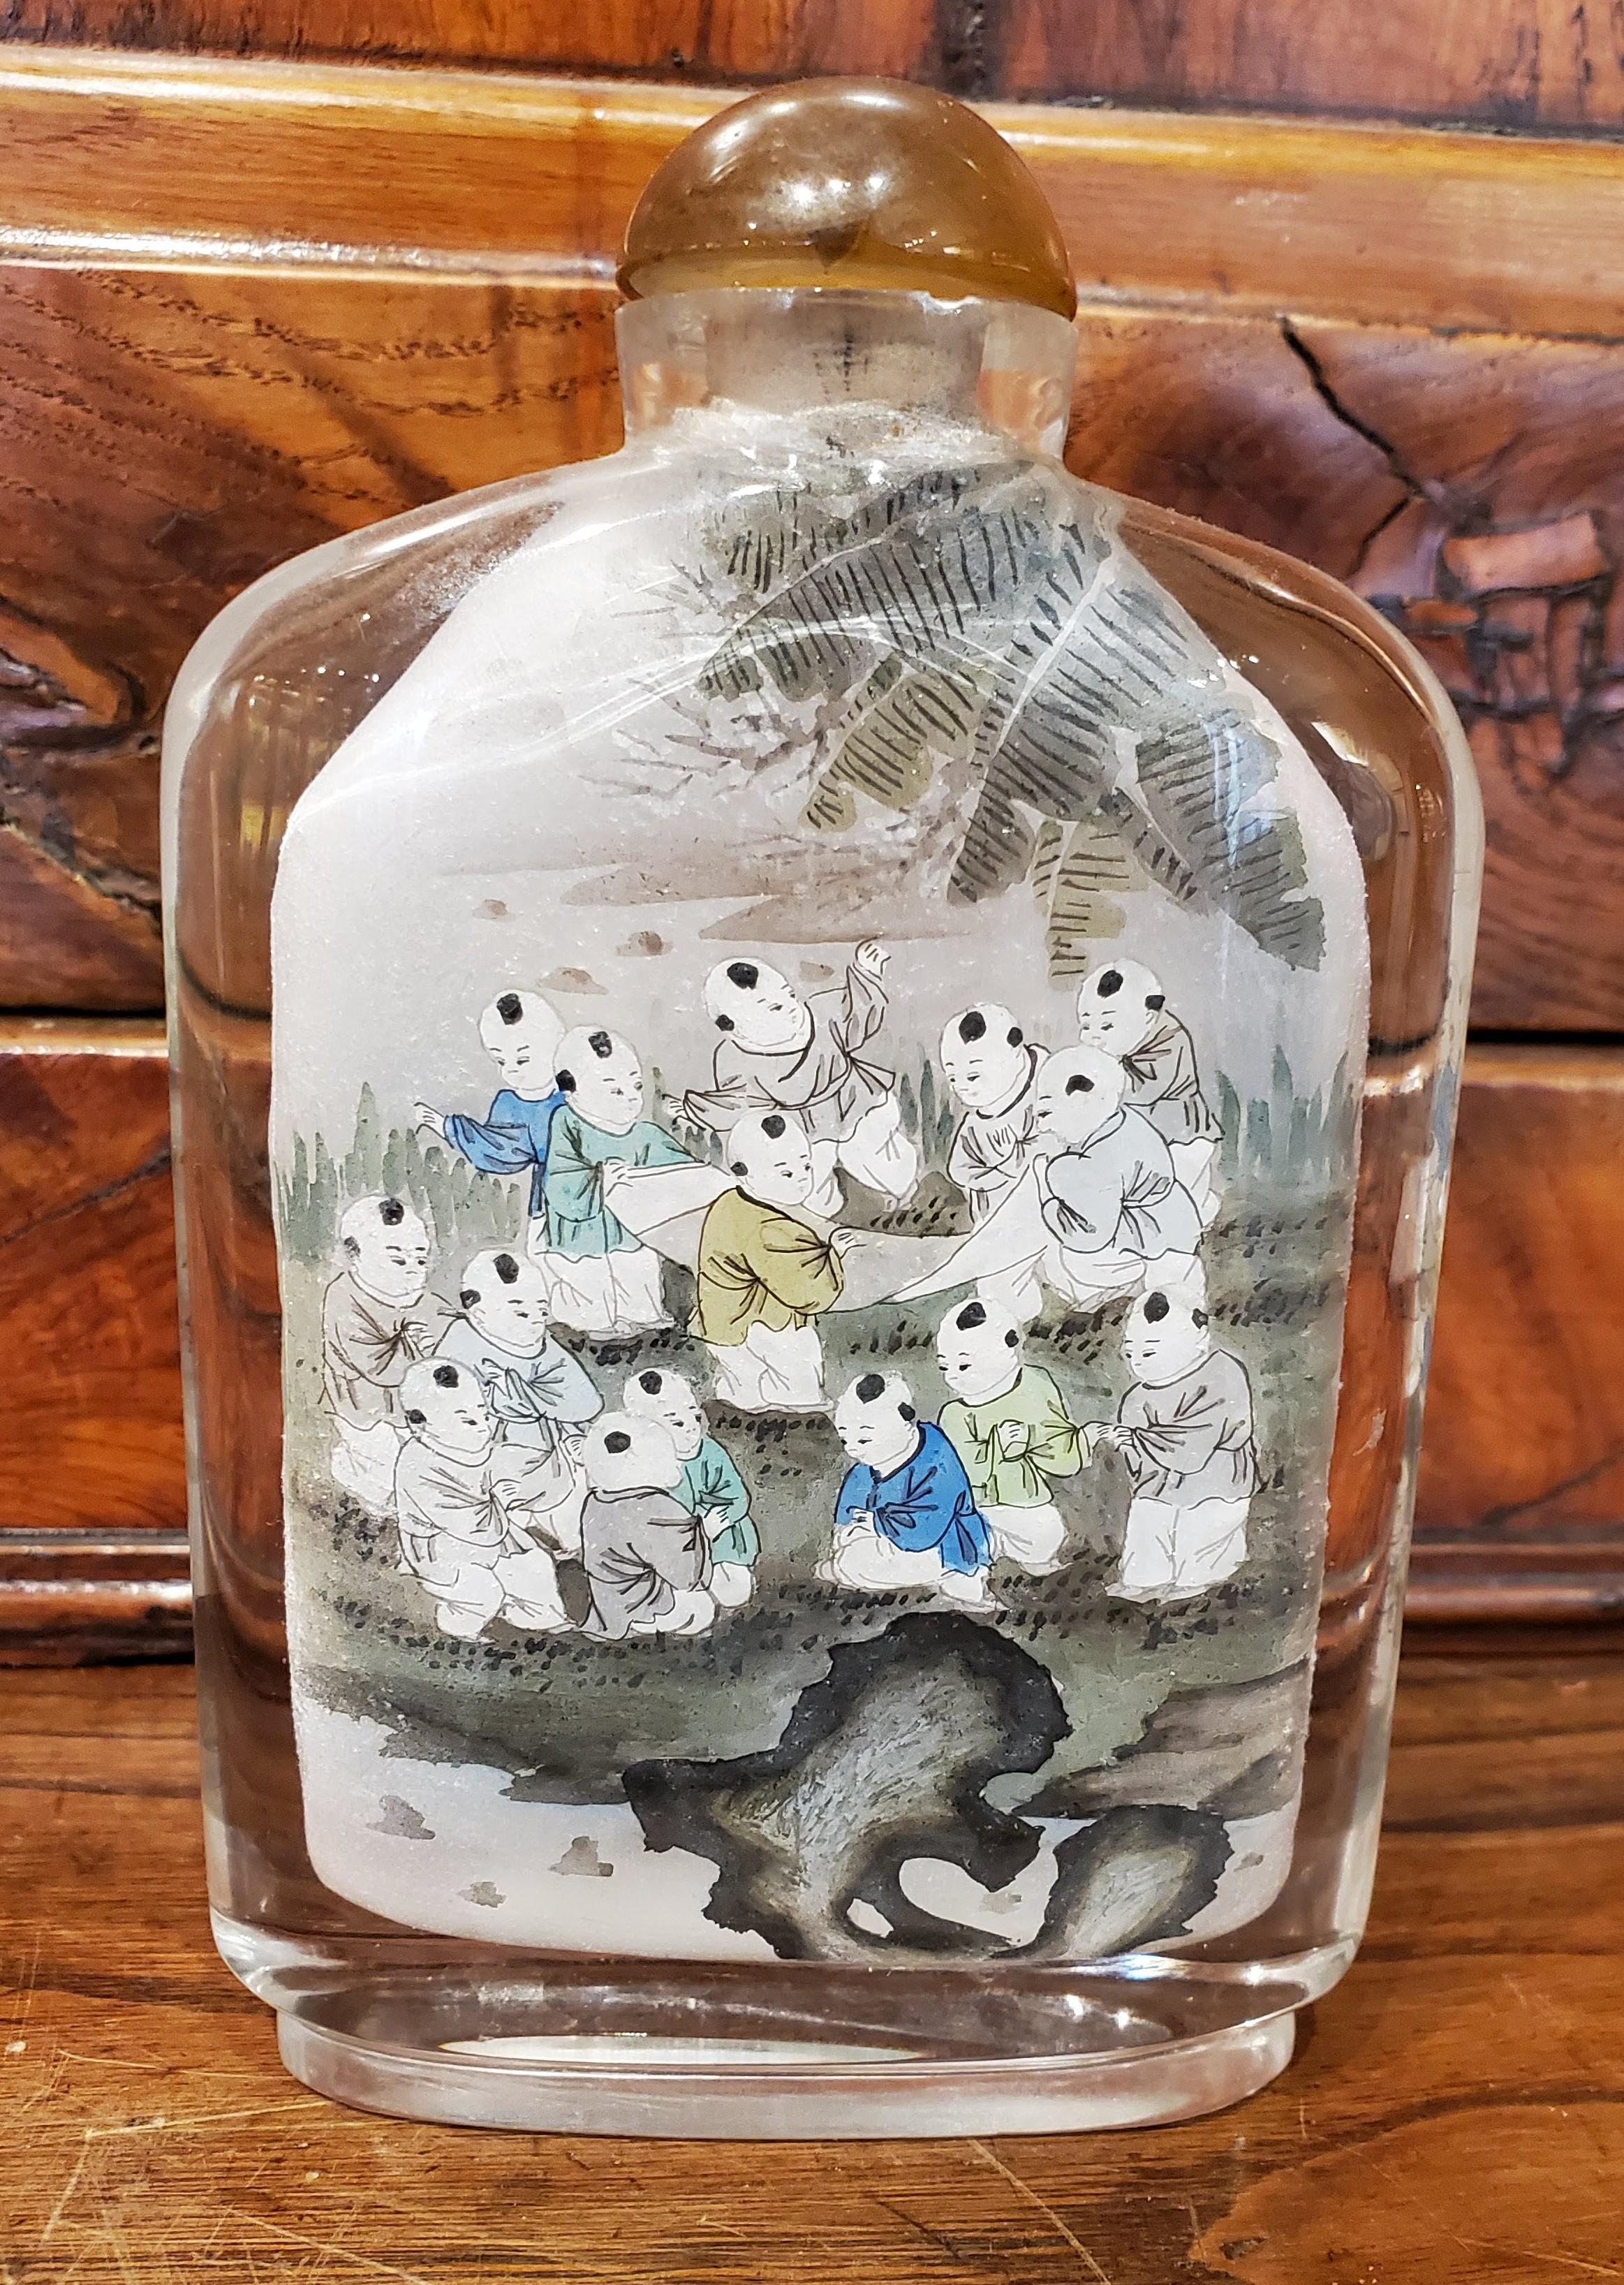 This beautiful late 19th century Chinese reverse painted glass snuff bottle is an incredible example of the intricate skill required for reverse painting with a detailed scene inside the front and back surfaces. This painting technique is known as